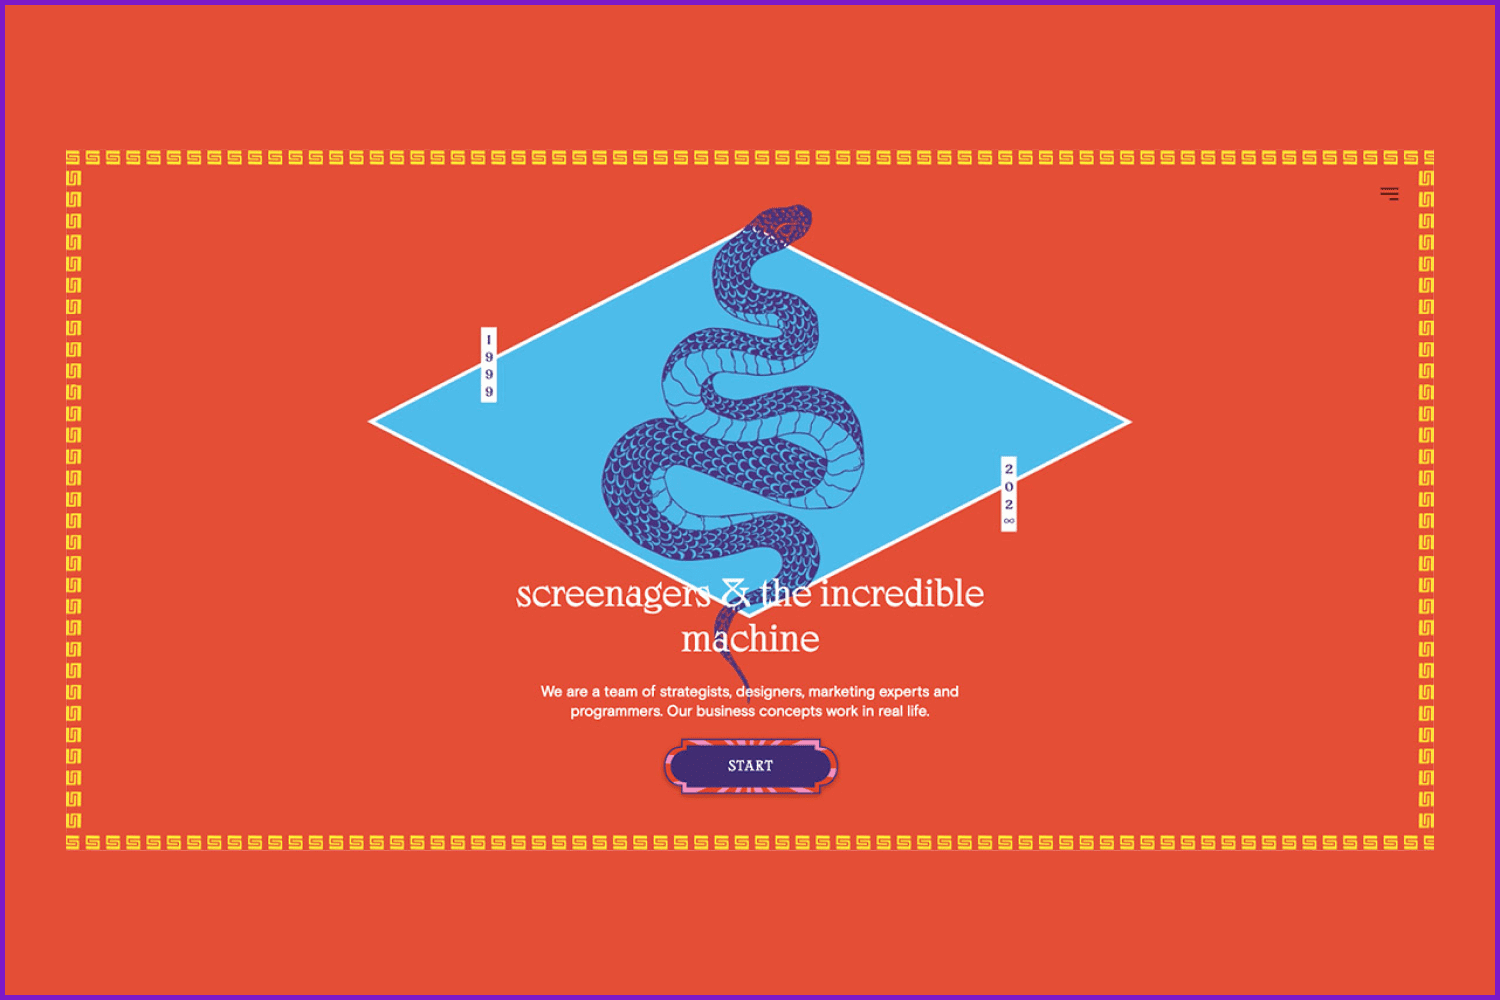 Bright orange background with a blue snake.